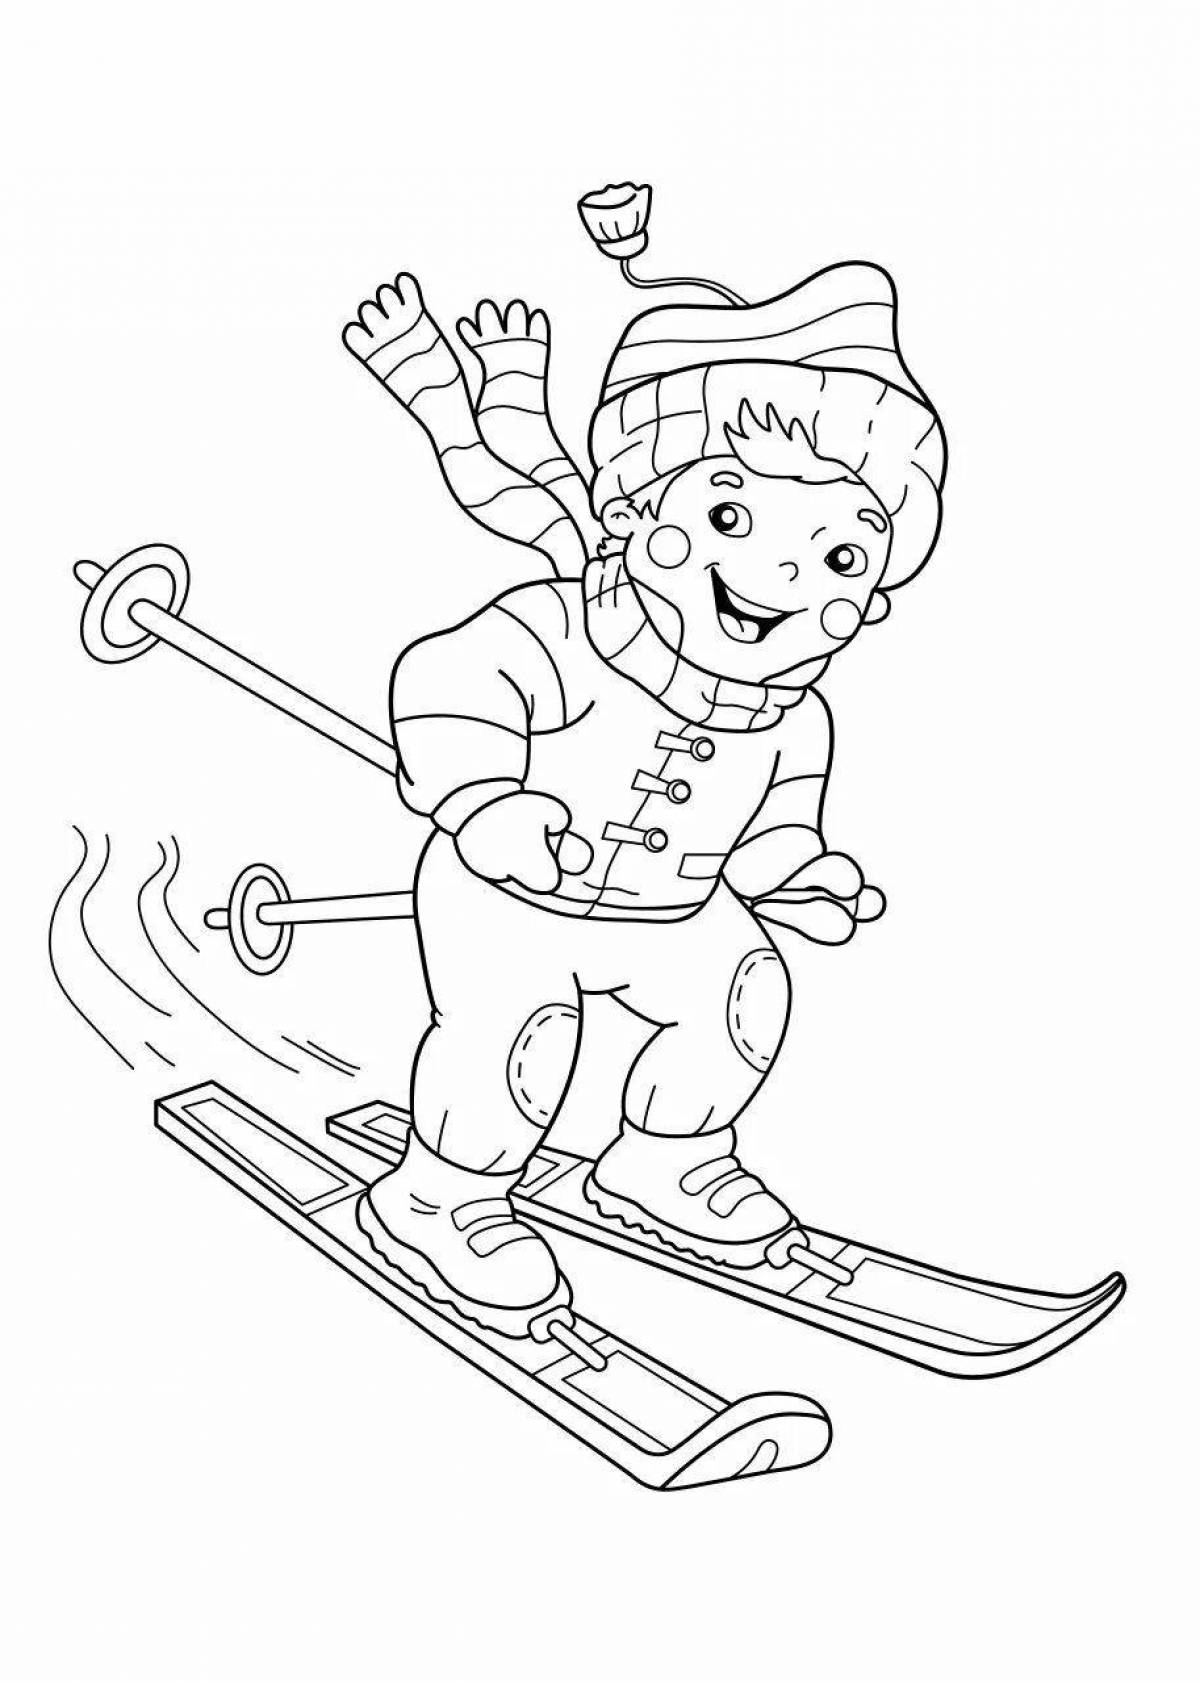 Radiant skiing coloring book for beginners